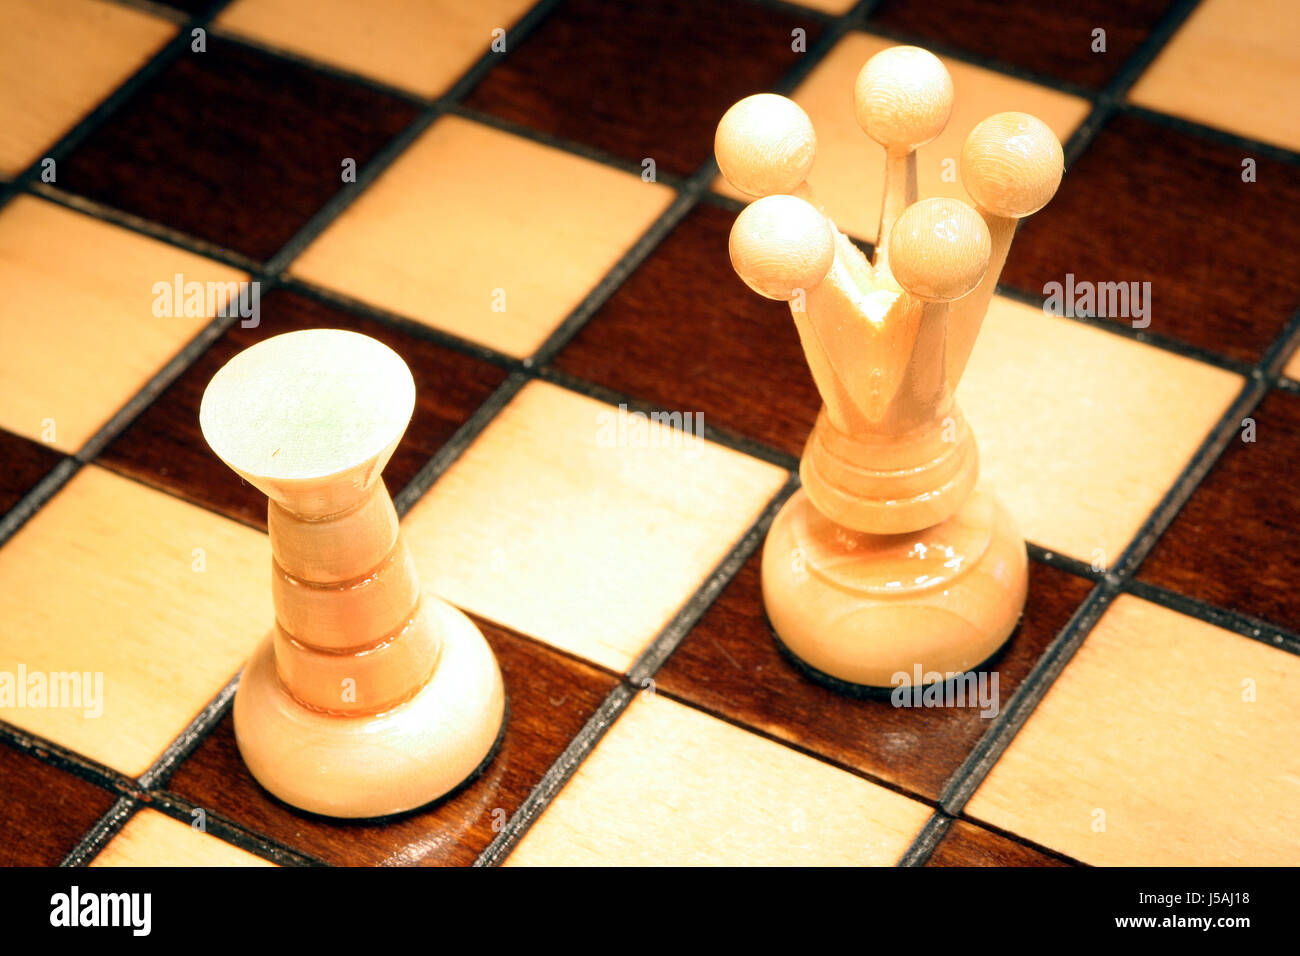 tower strategy lady think thoughts chess chessboard chessman chessmen mental Stock Photo